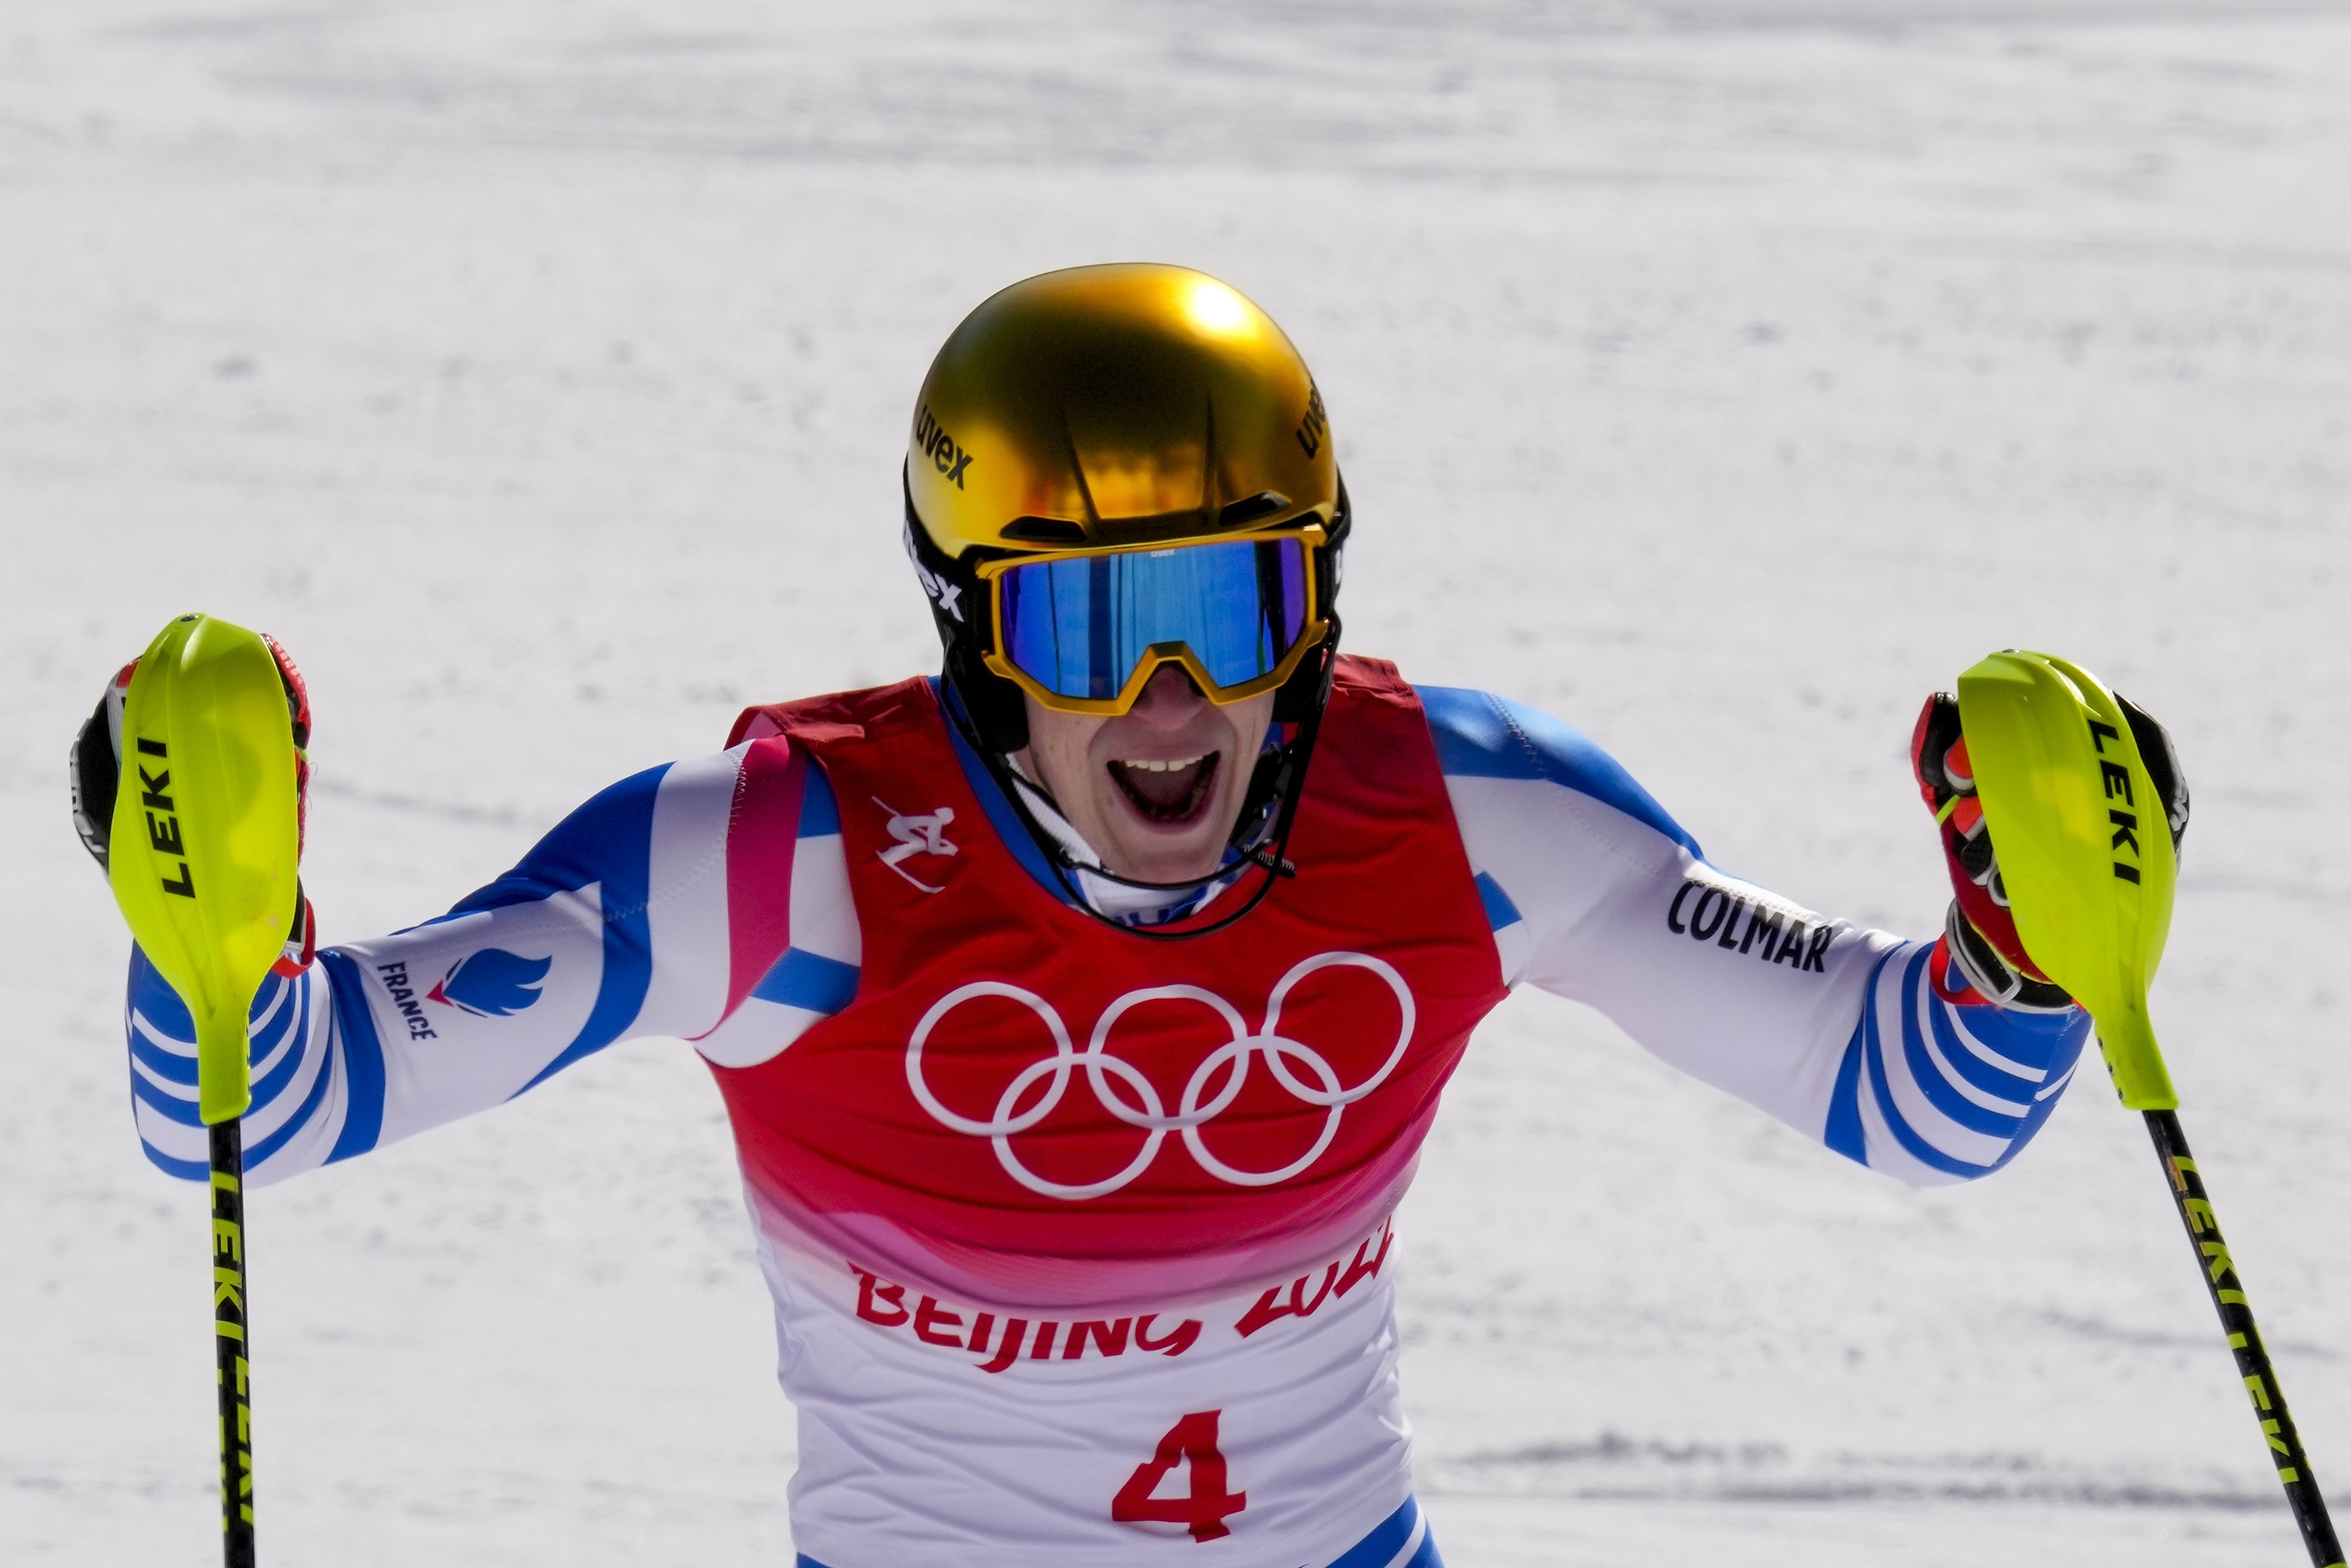 France's Clement Noel celebrates after winning gold on Wednesday.